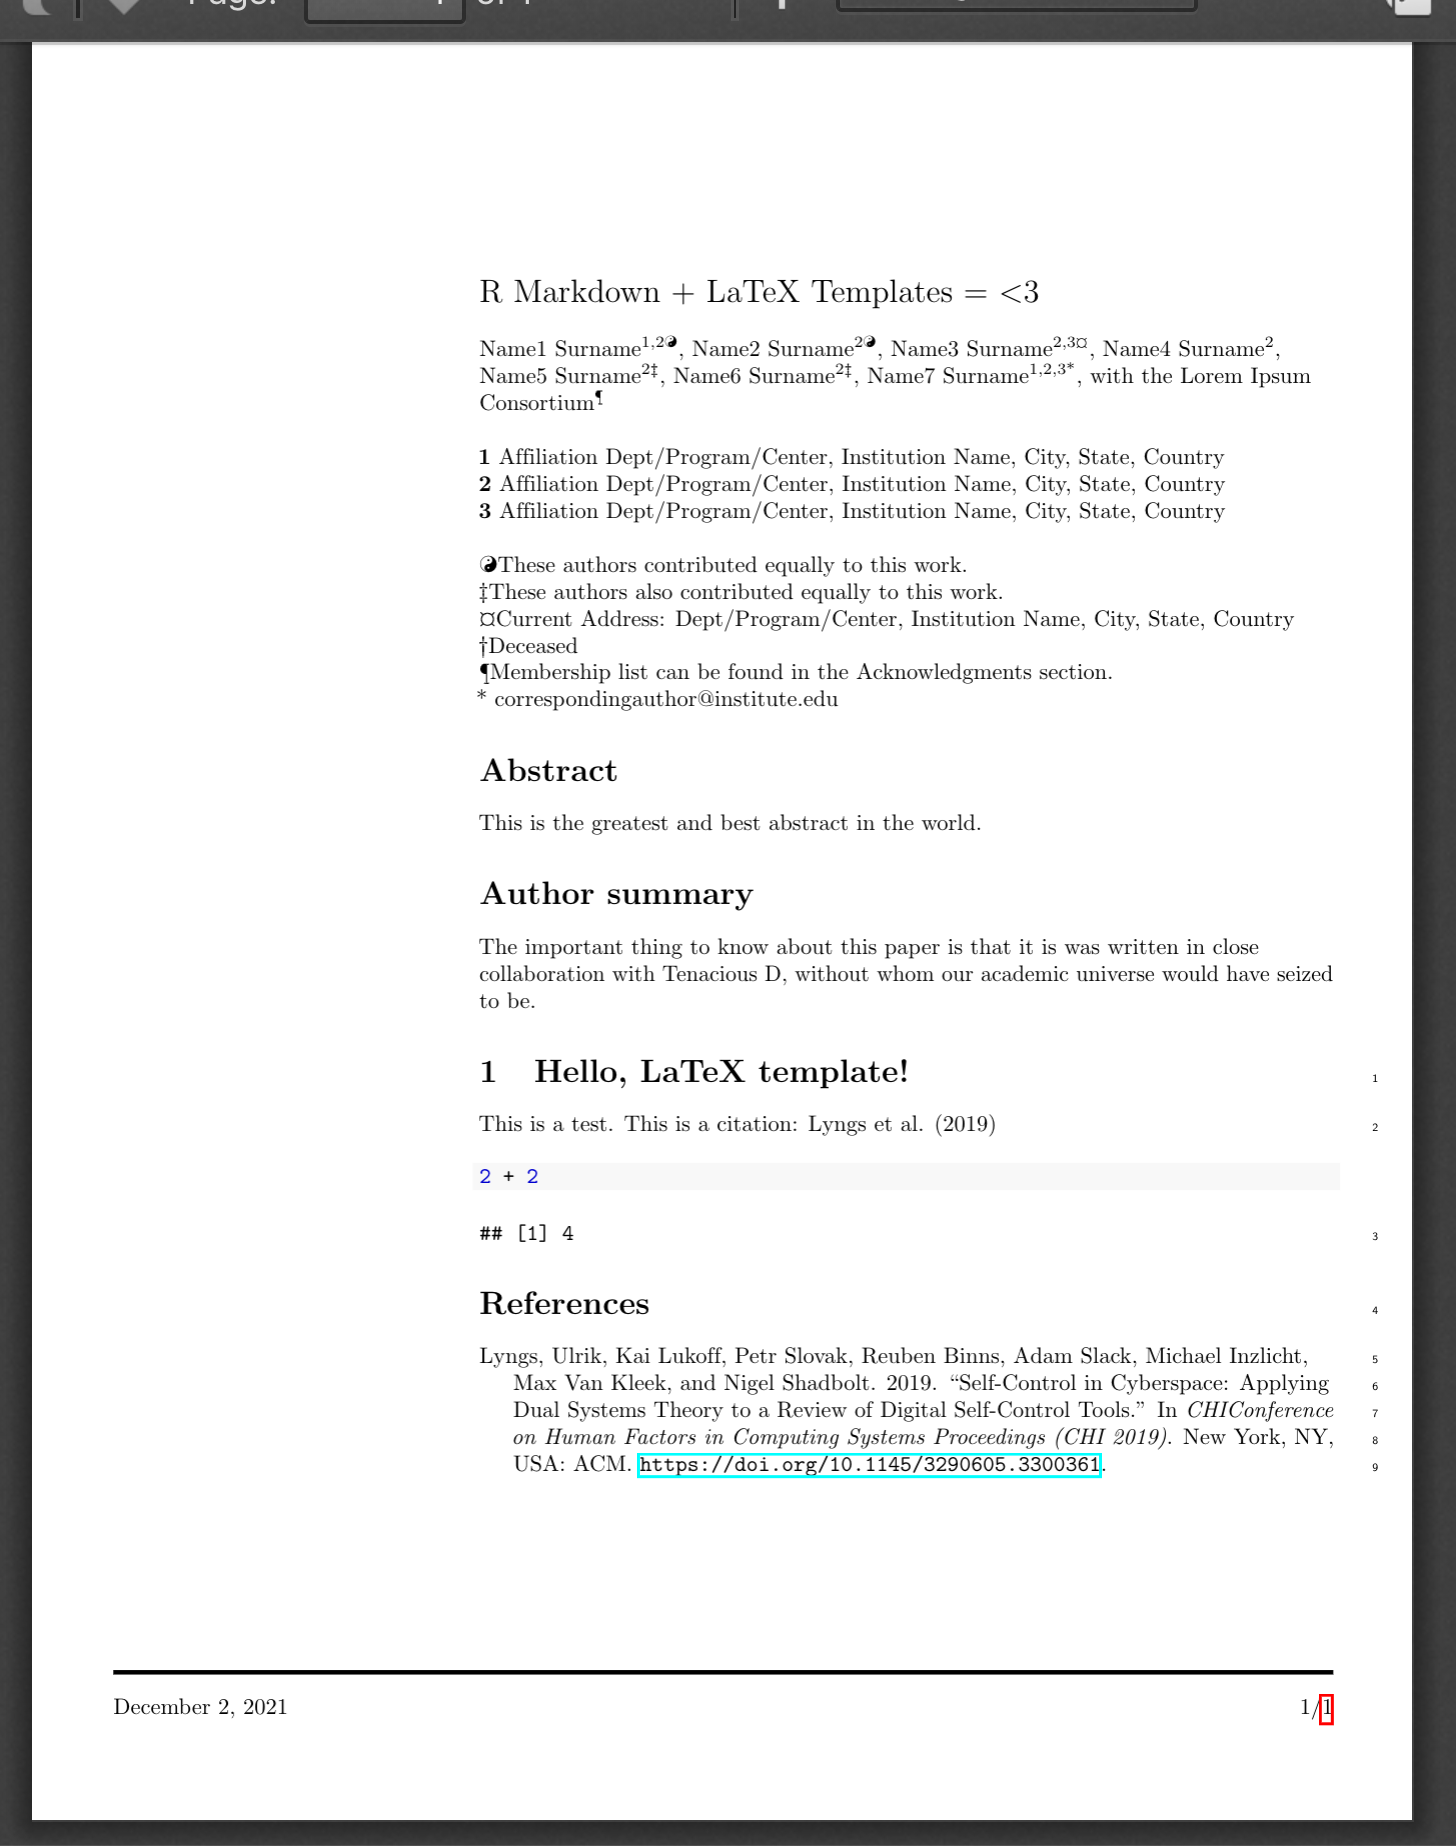 How to Adapt Any LaTeX Template for Use With R Markdown in Four Steps